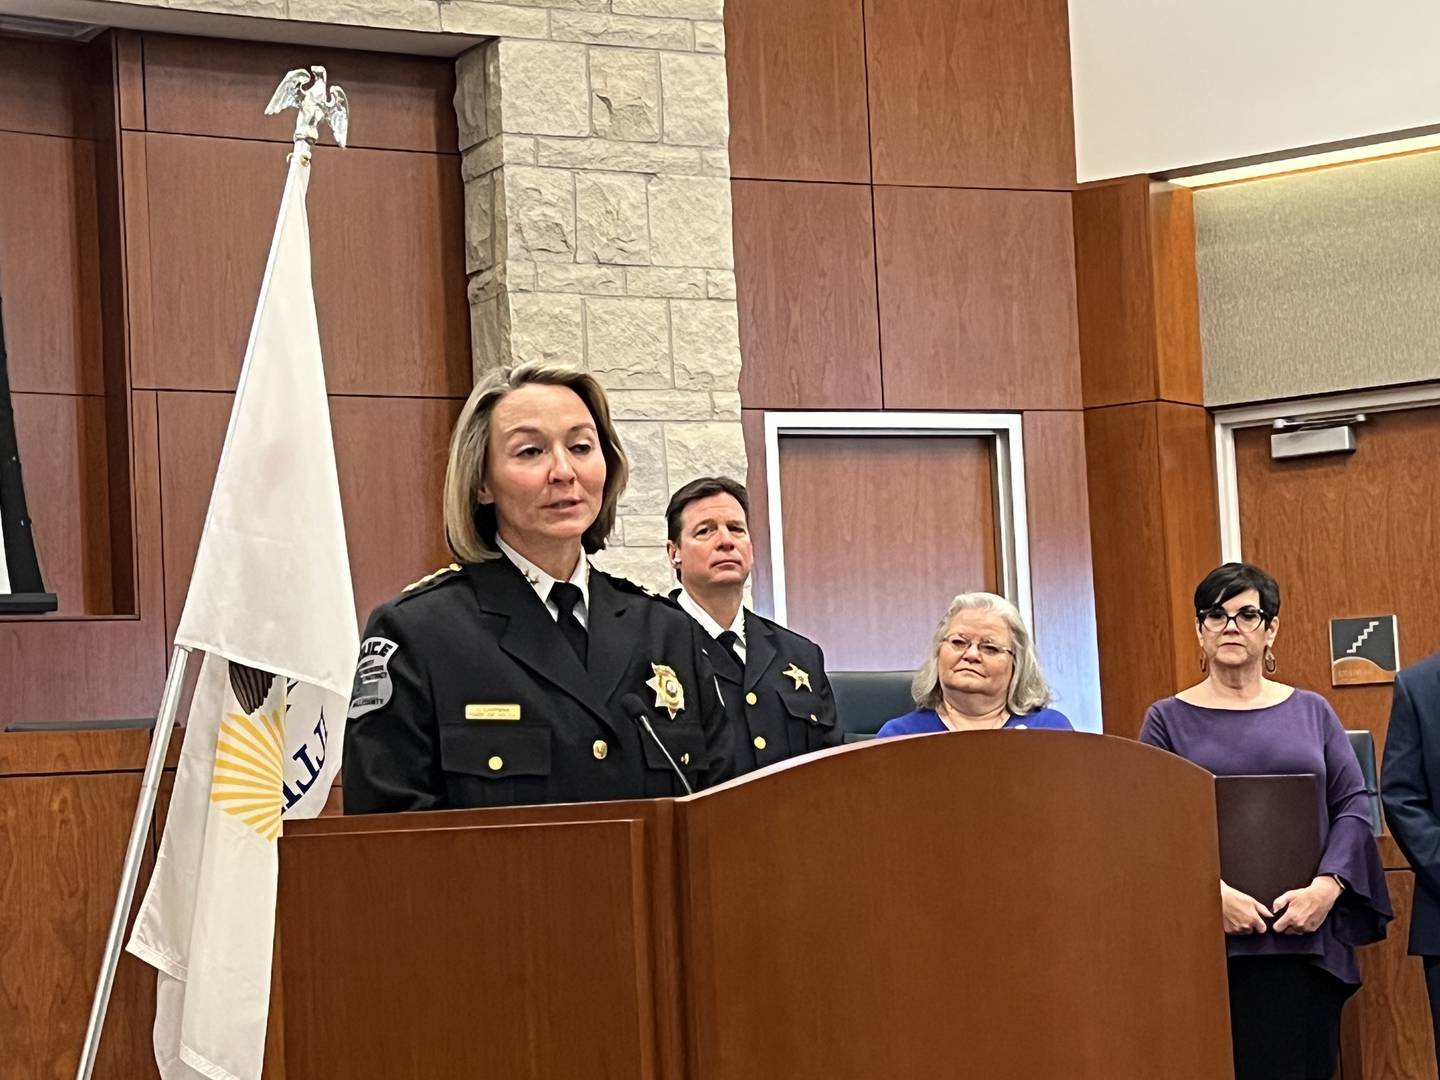 Tracy Chapman, police chief for the Forest Preserve of Will County, speaks about legislation modifying the Illinois Line of Duty Compensation Act at a press conference on Monday in Romeoville.